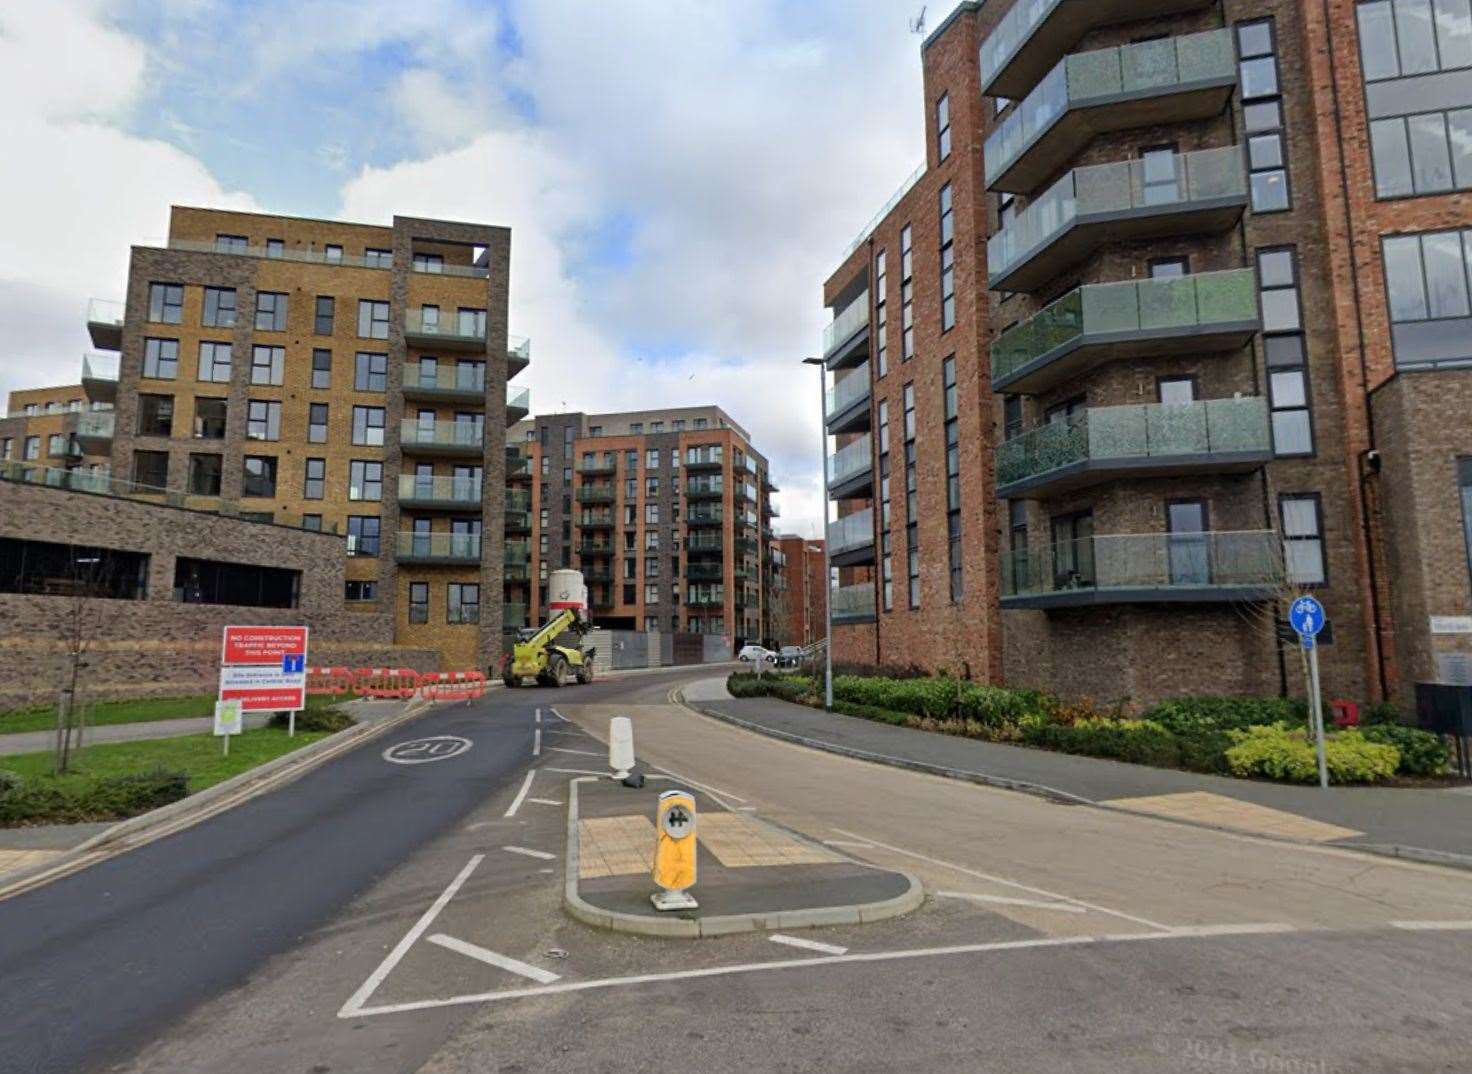 Three people were involved in an altercation in William Mundy Way, Dartford. Picture: Google